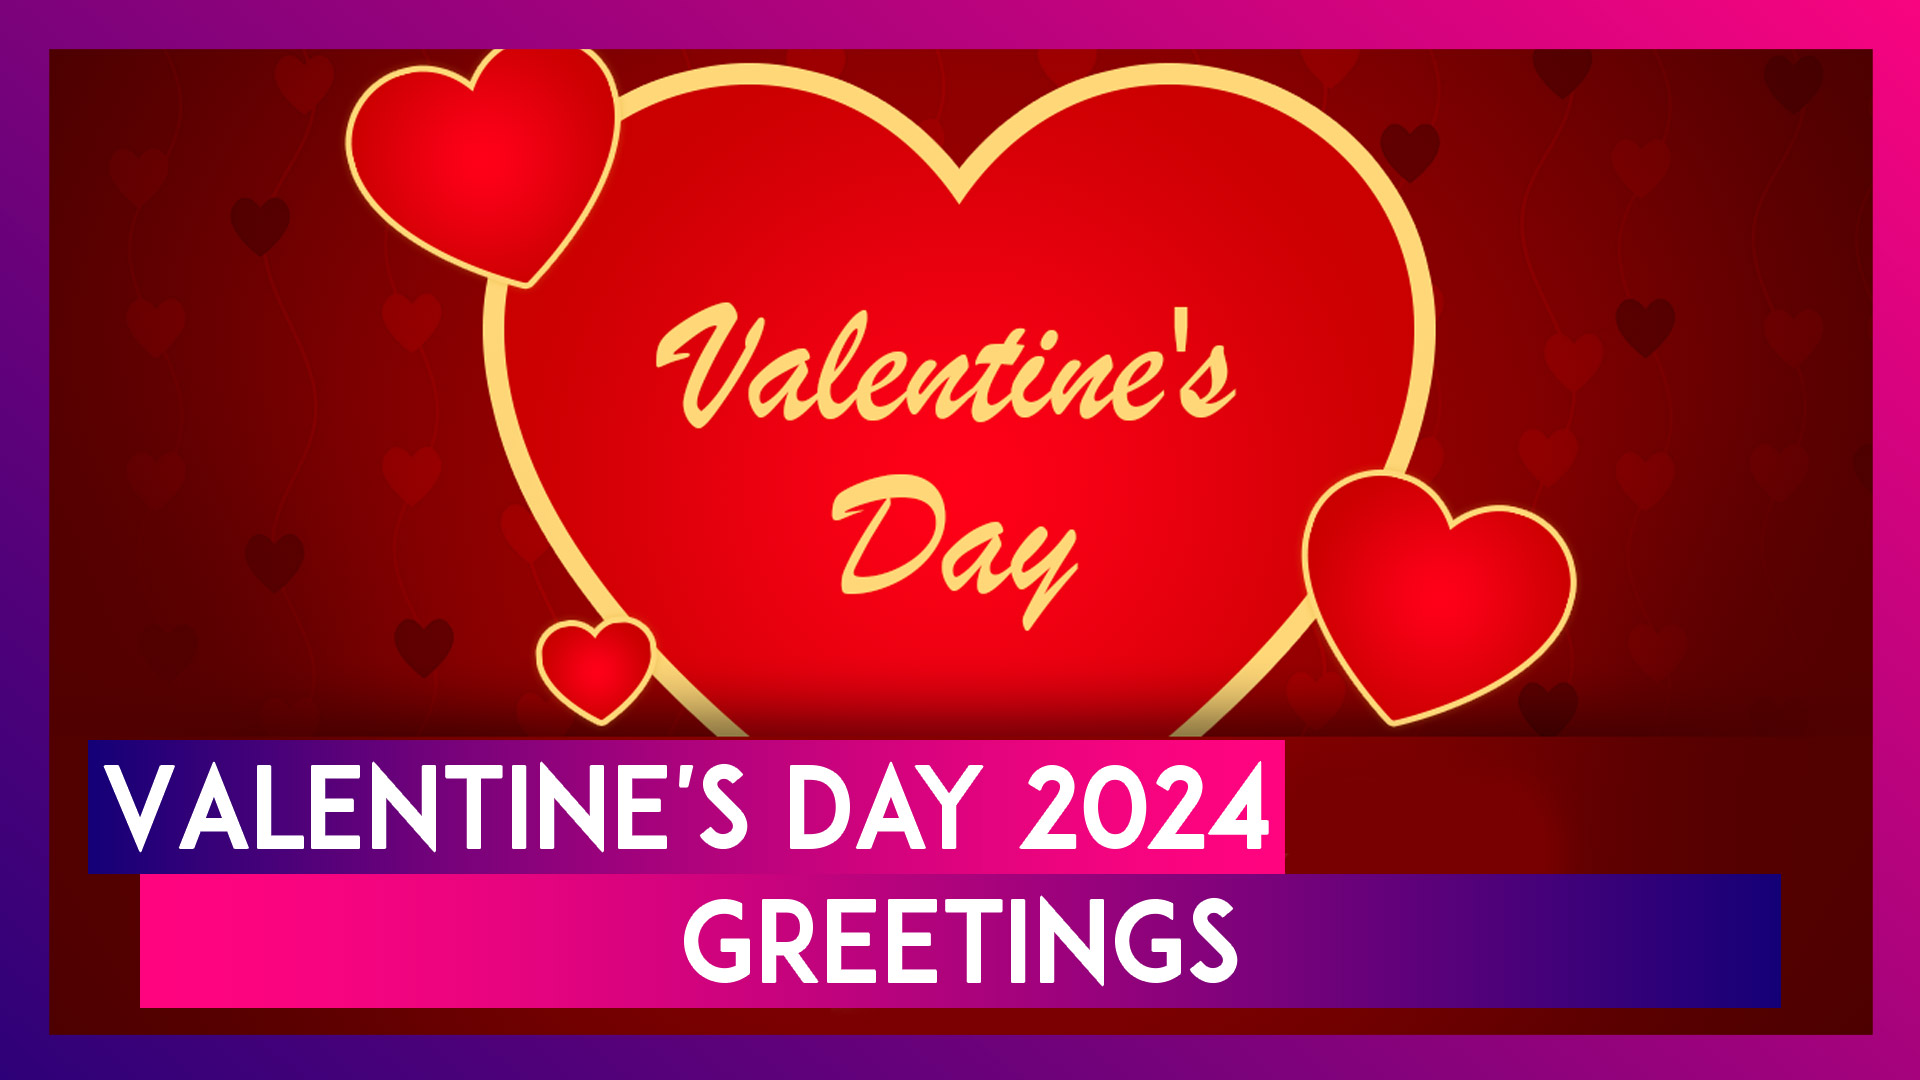 Happy Valentine's Day 2024 Greetings: Romantic Quotes & Messages To Share With Your Beloved Partner